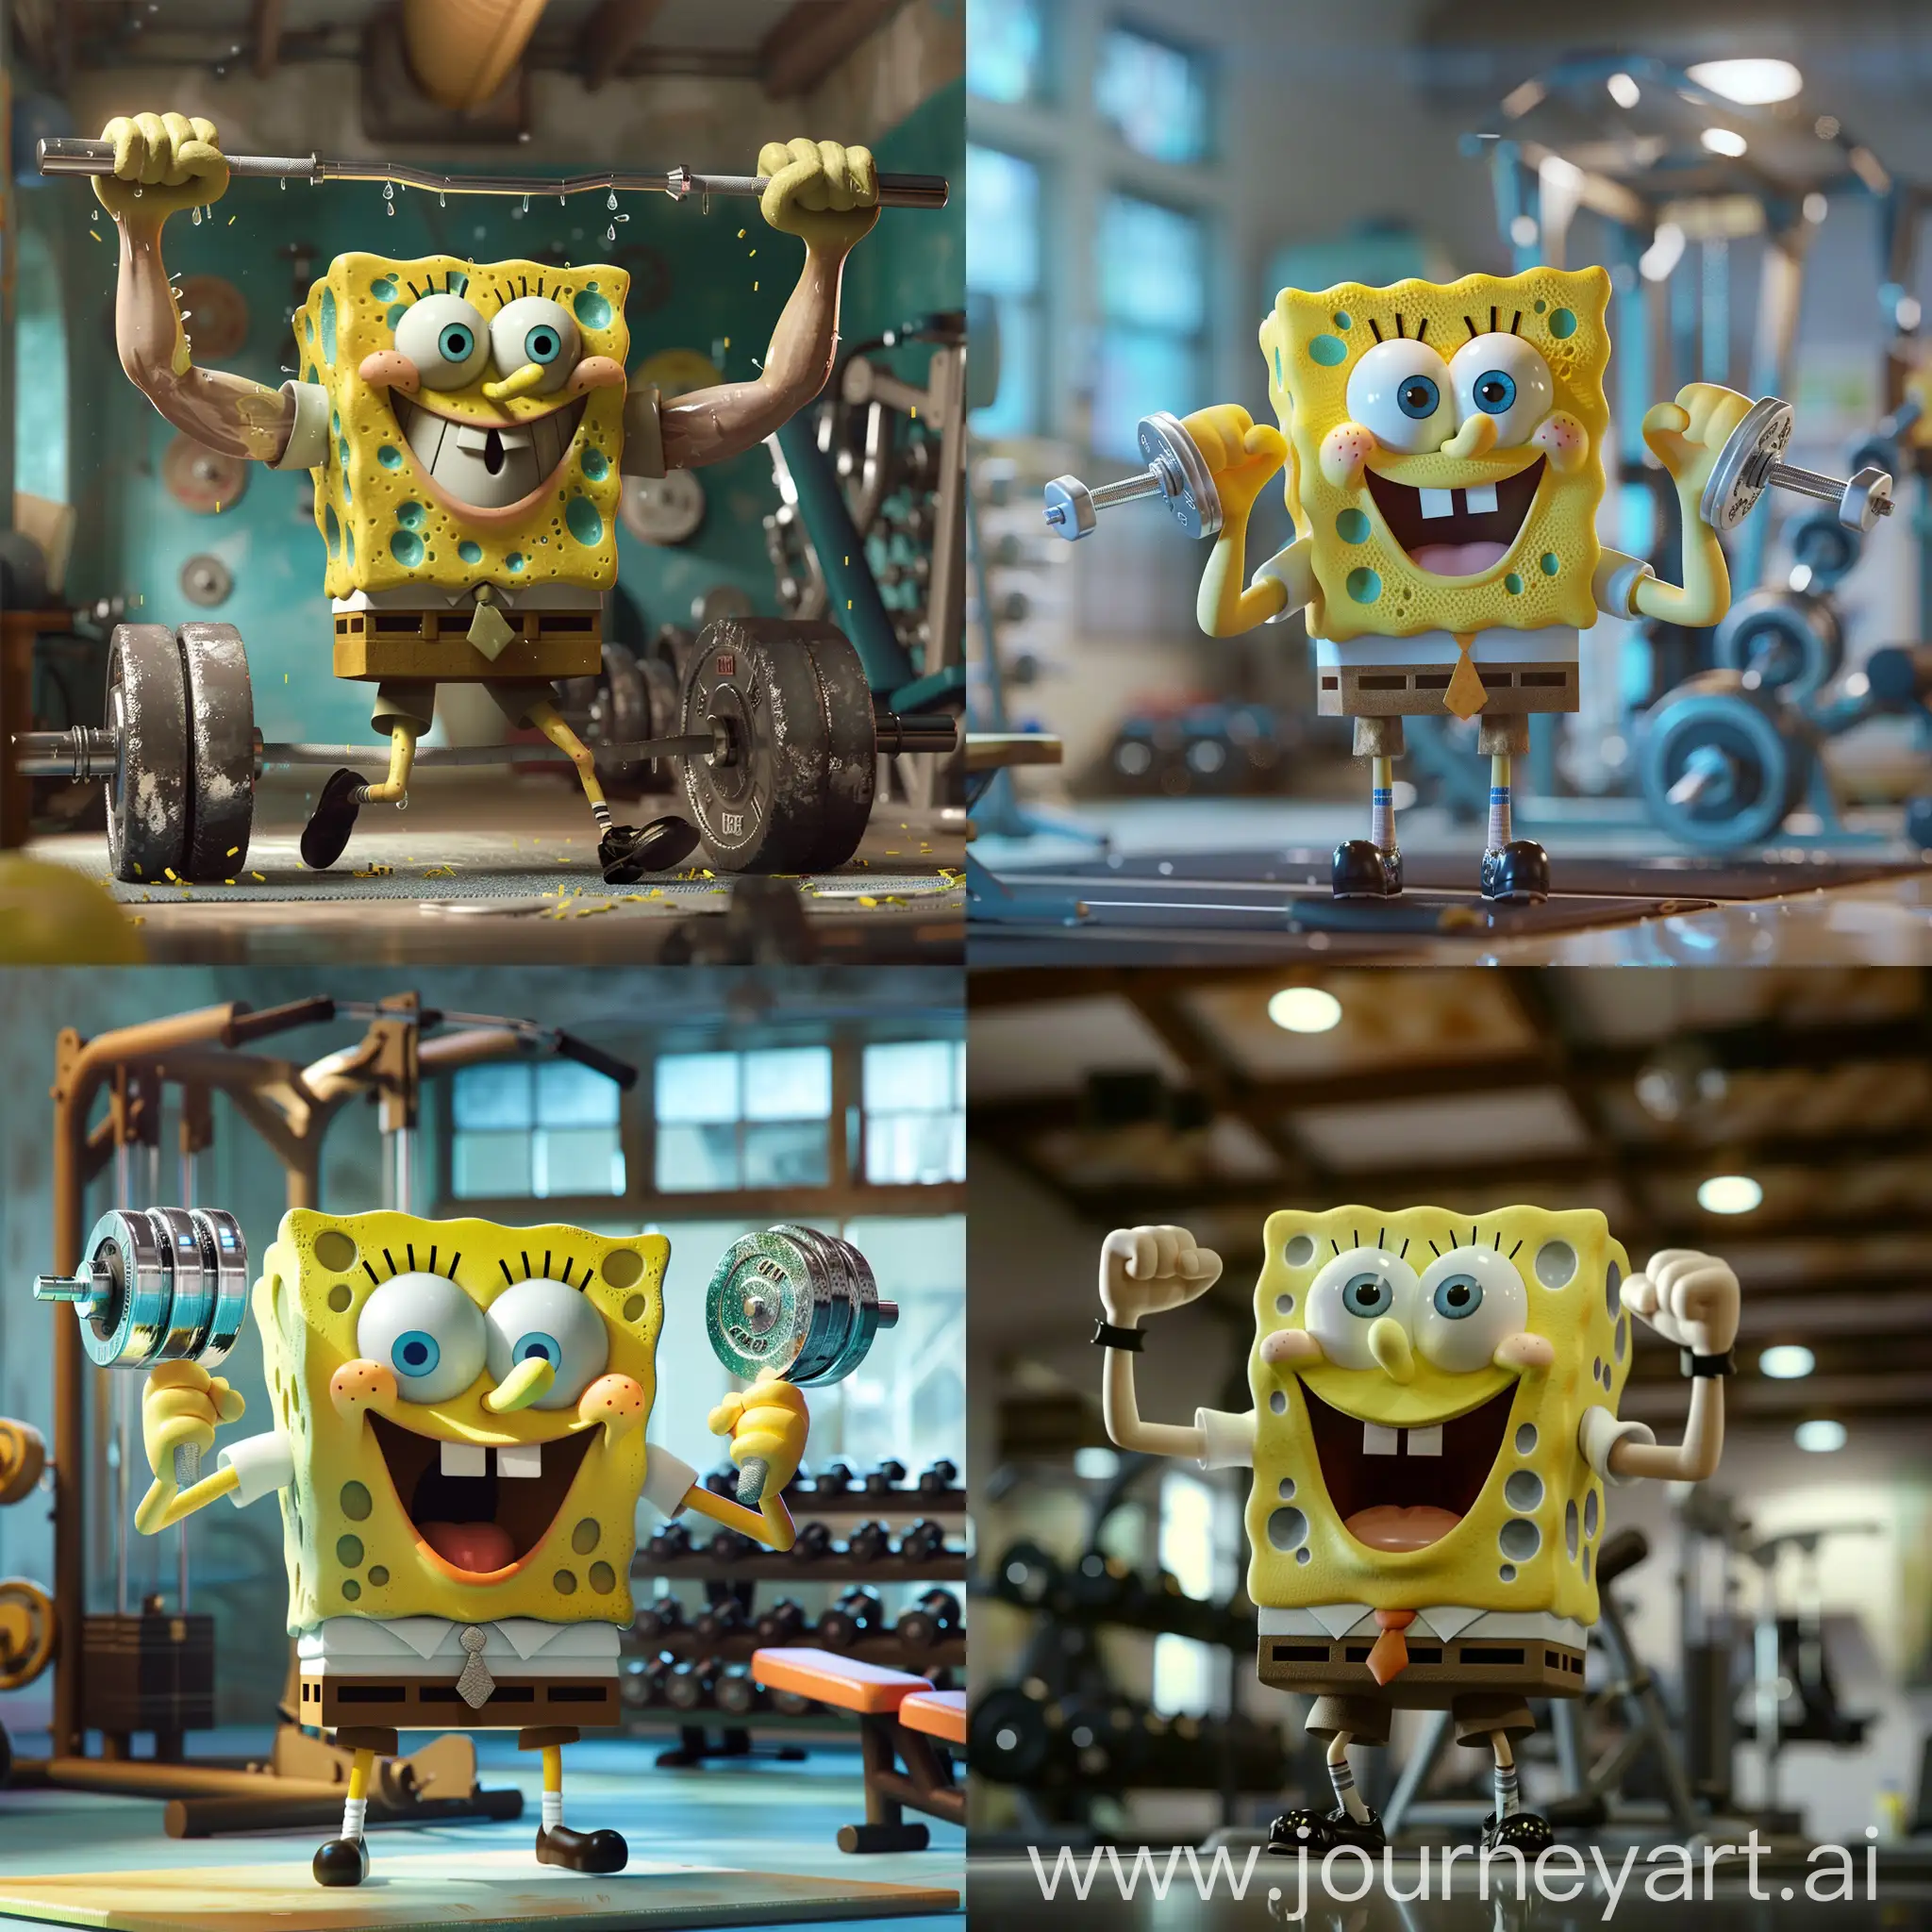 SpongeBob-Working-Out-in-the-Gym-with-Muscular-Build